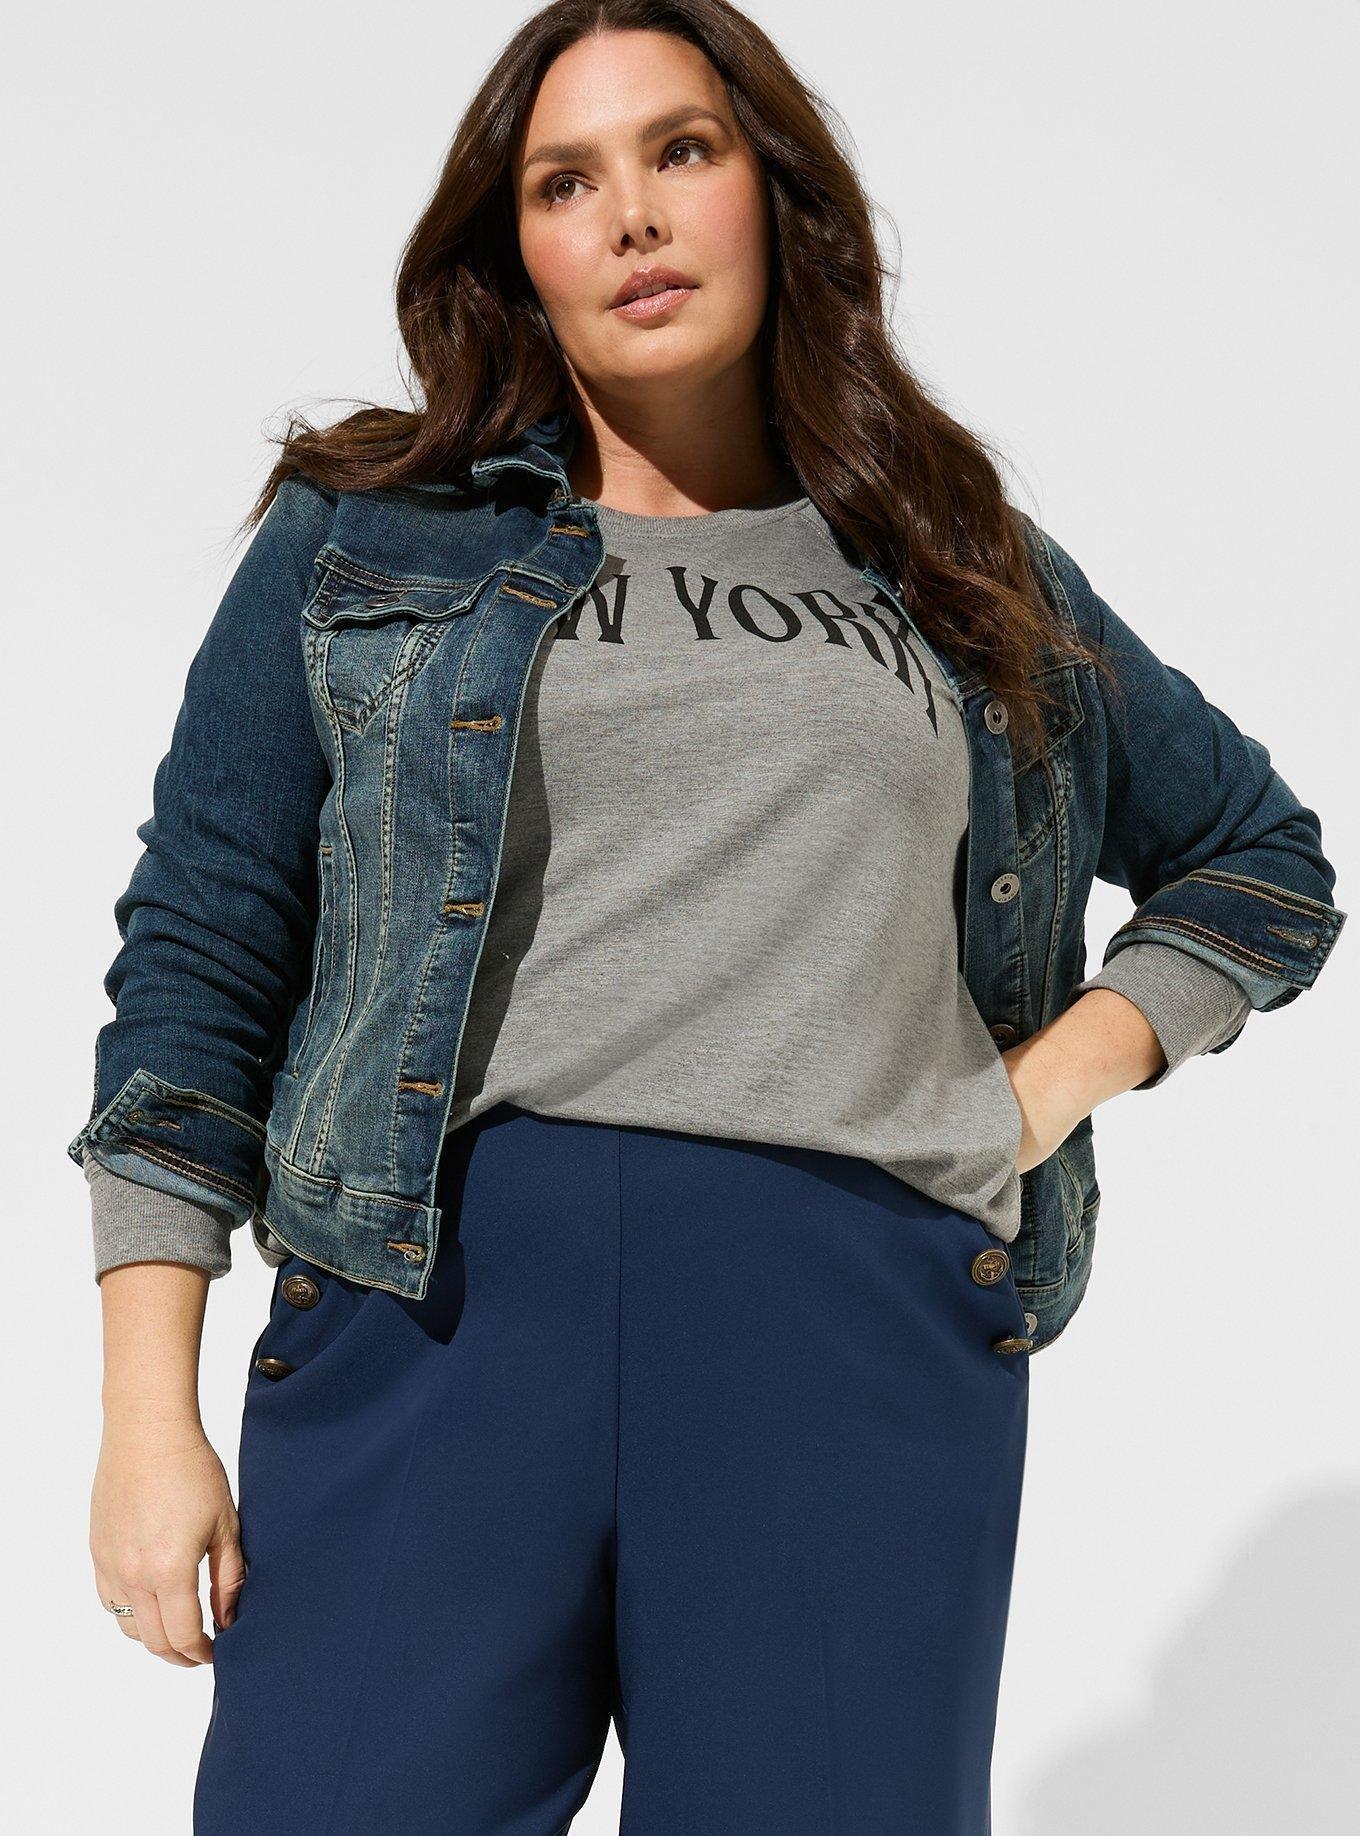 Demi Strapless Top (Denim) - I Just Have to Have It